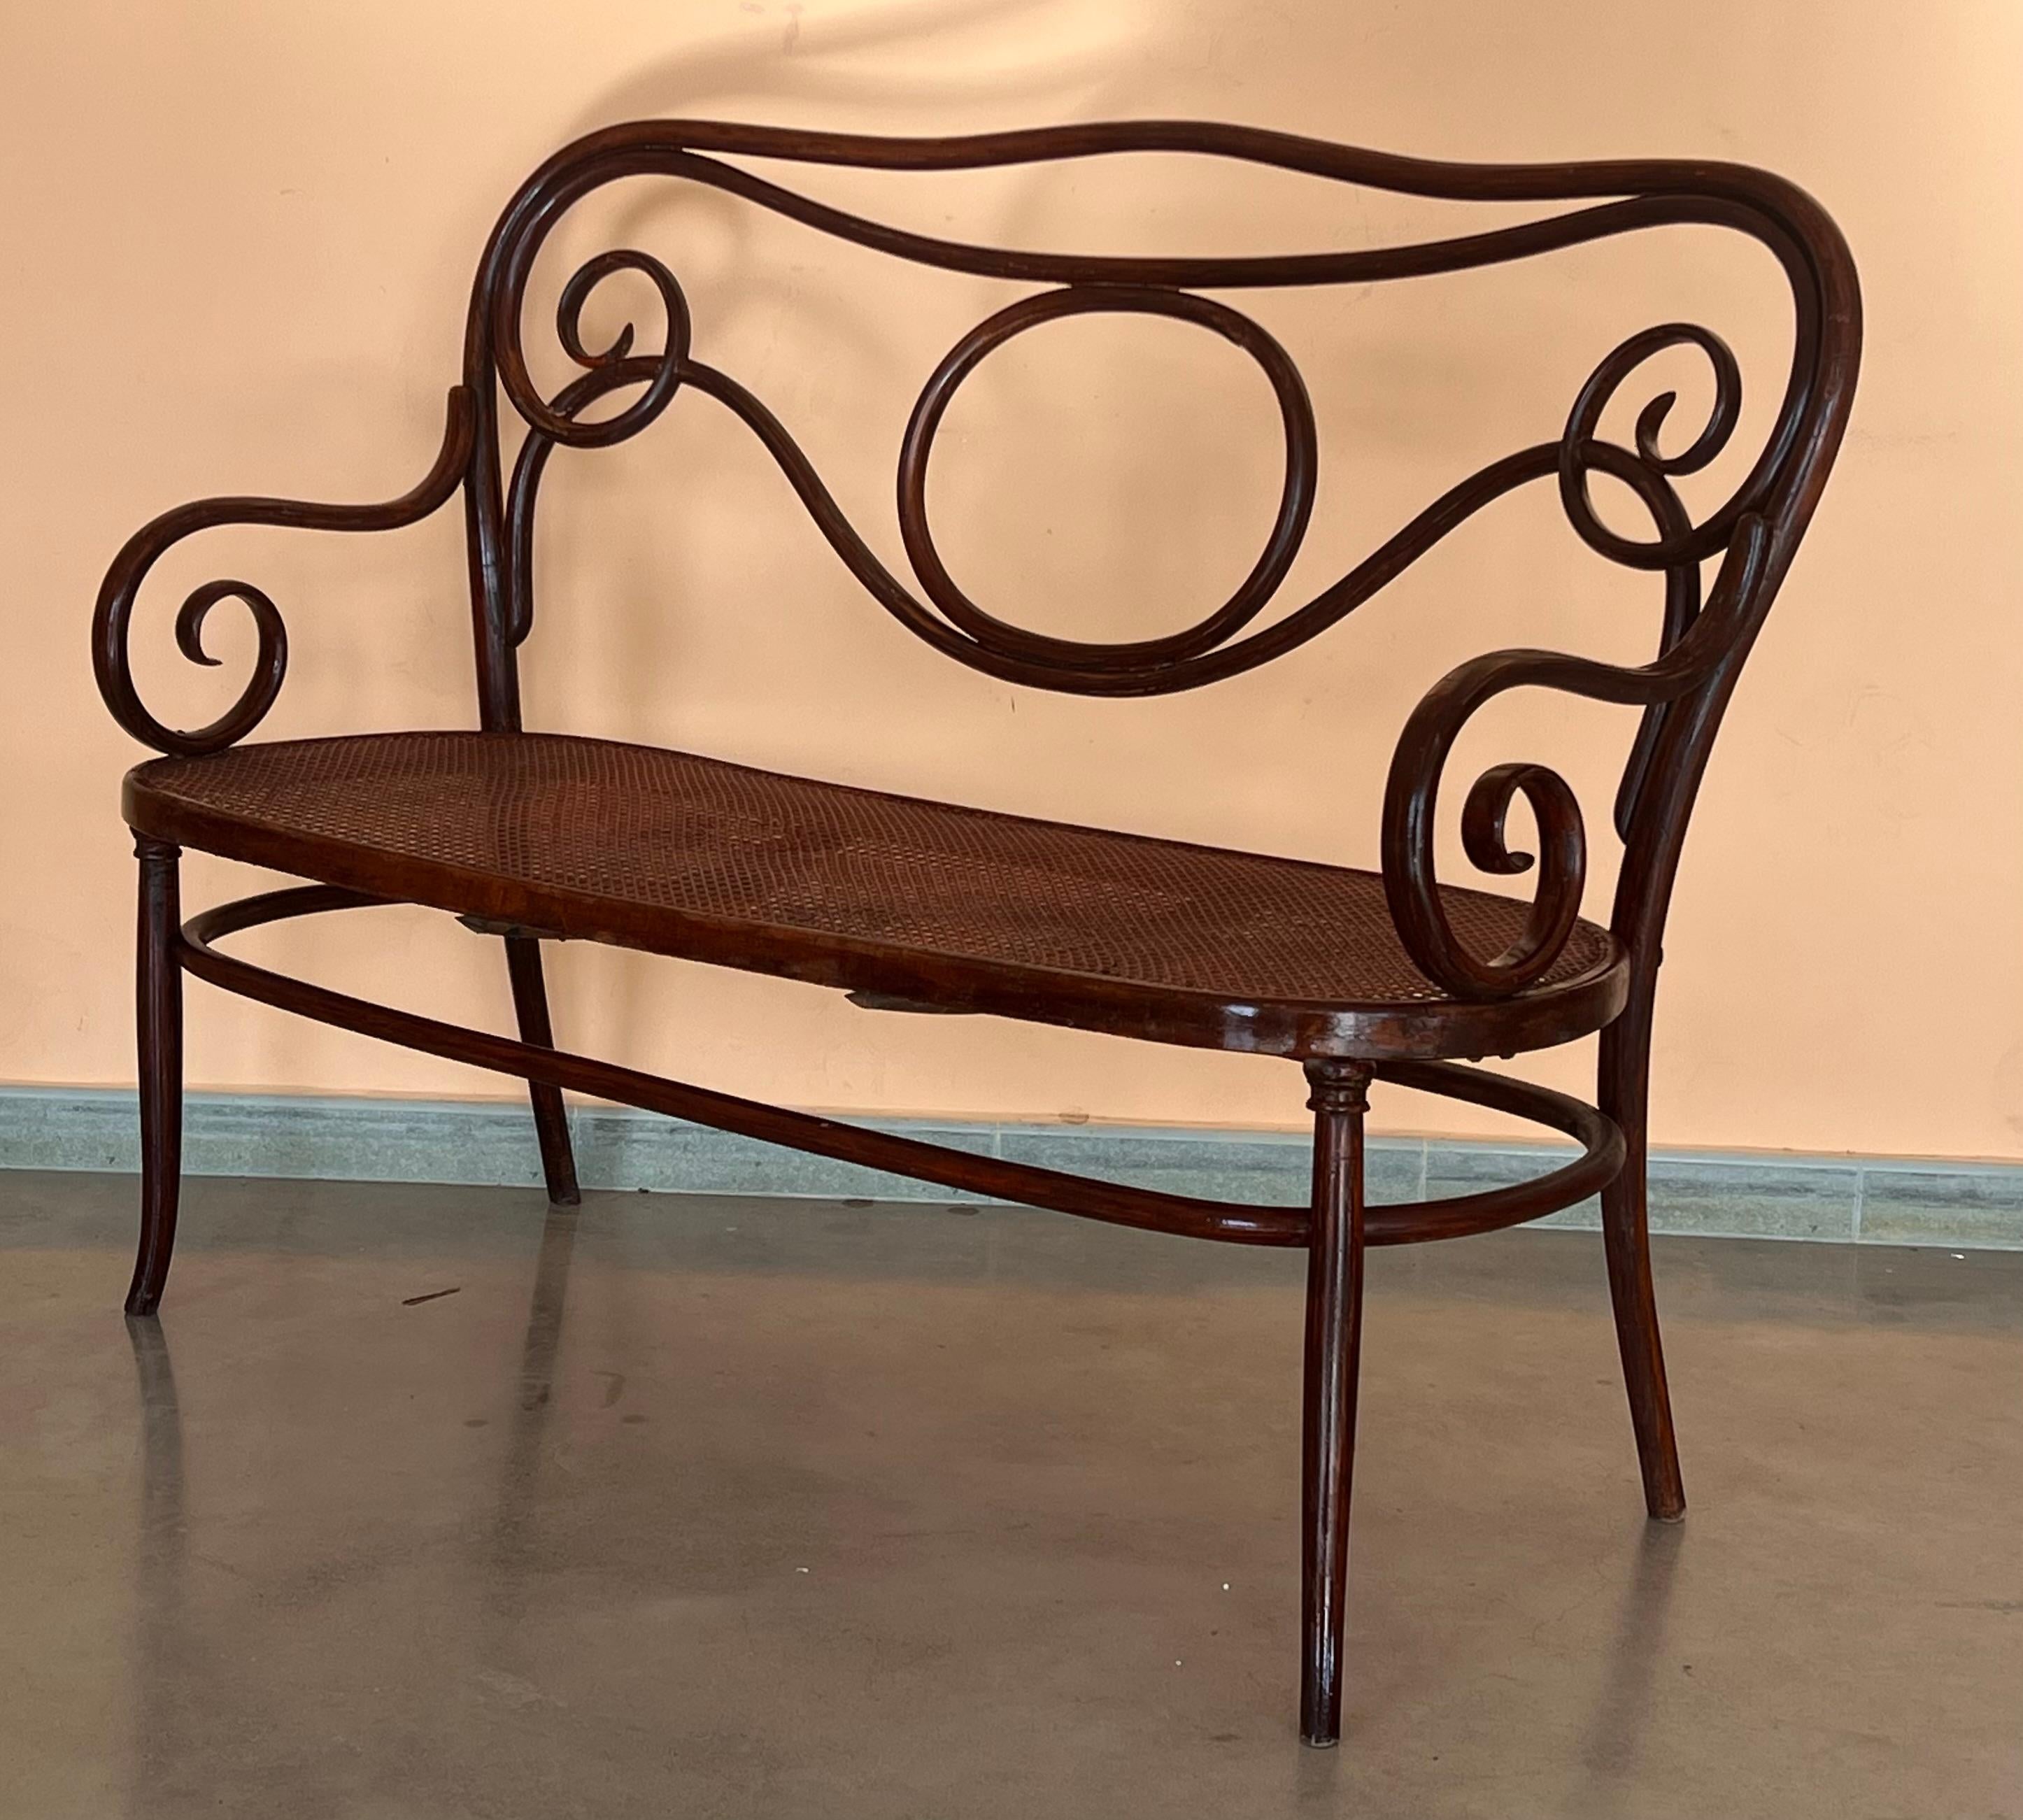 20th Century Bentwood Sofa signed by Fischel, circa 1900, Caned Seat In Good Condition For Sale In Miami, FL